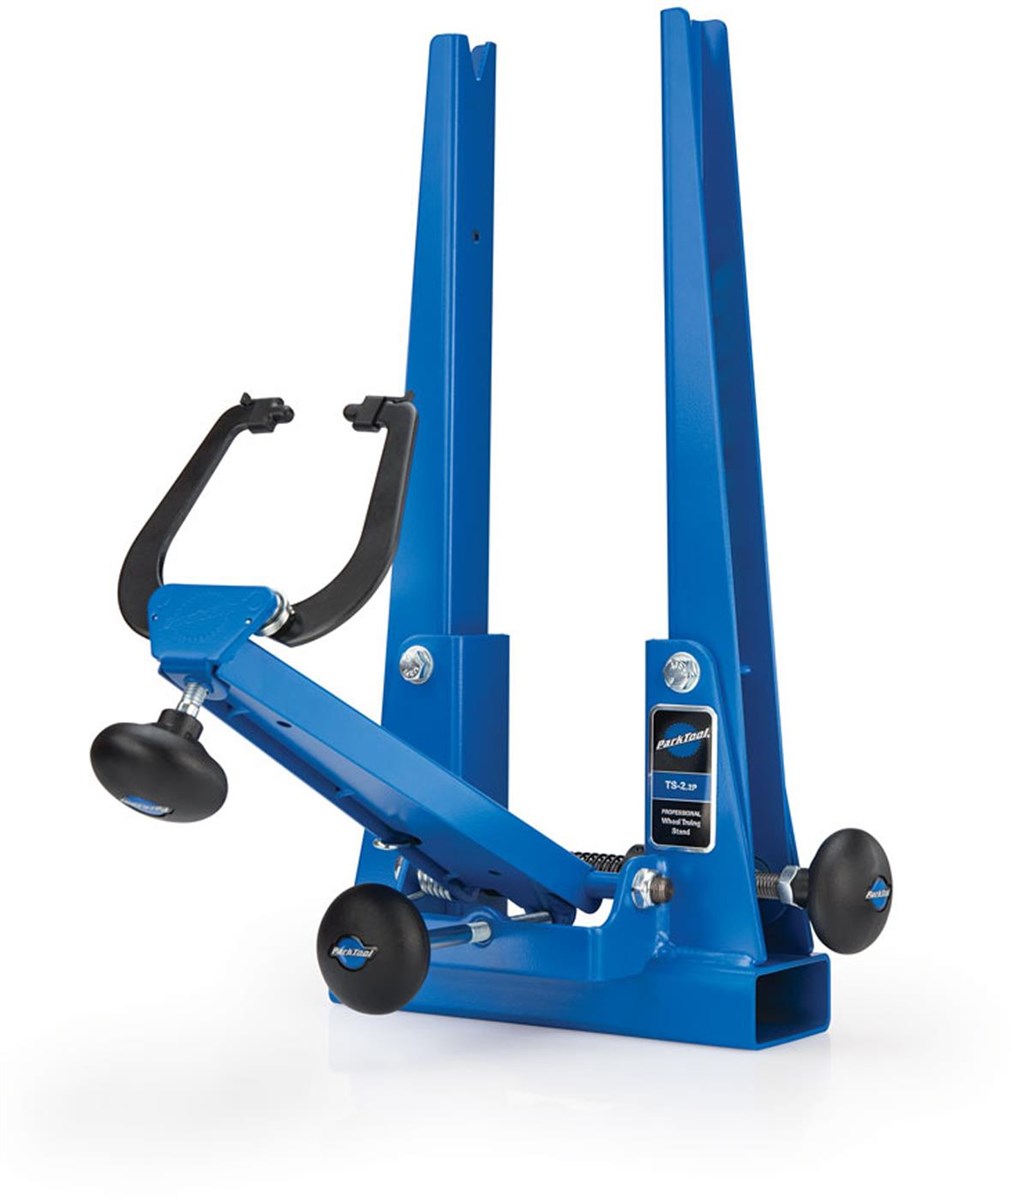 Park Tool TS2.2P - Professional Wheel Truing Stand